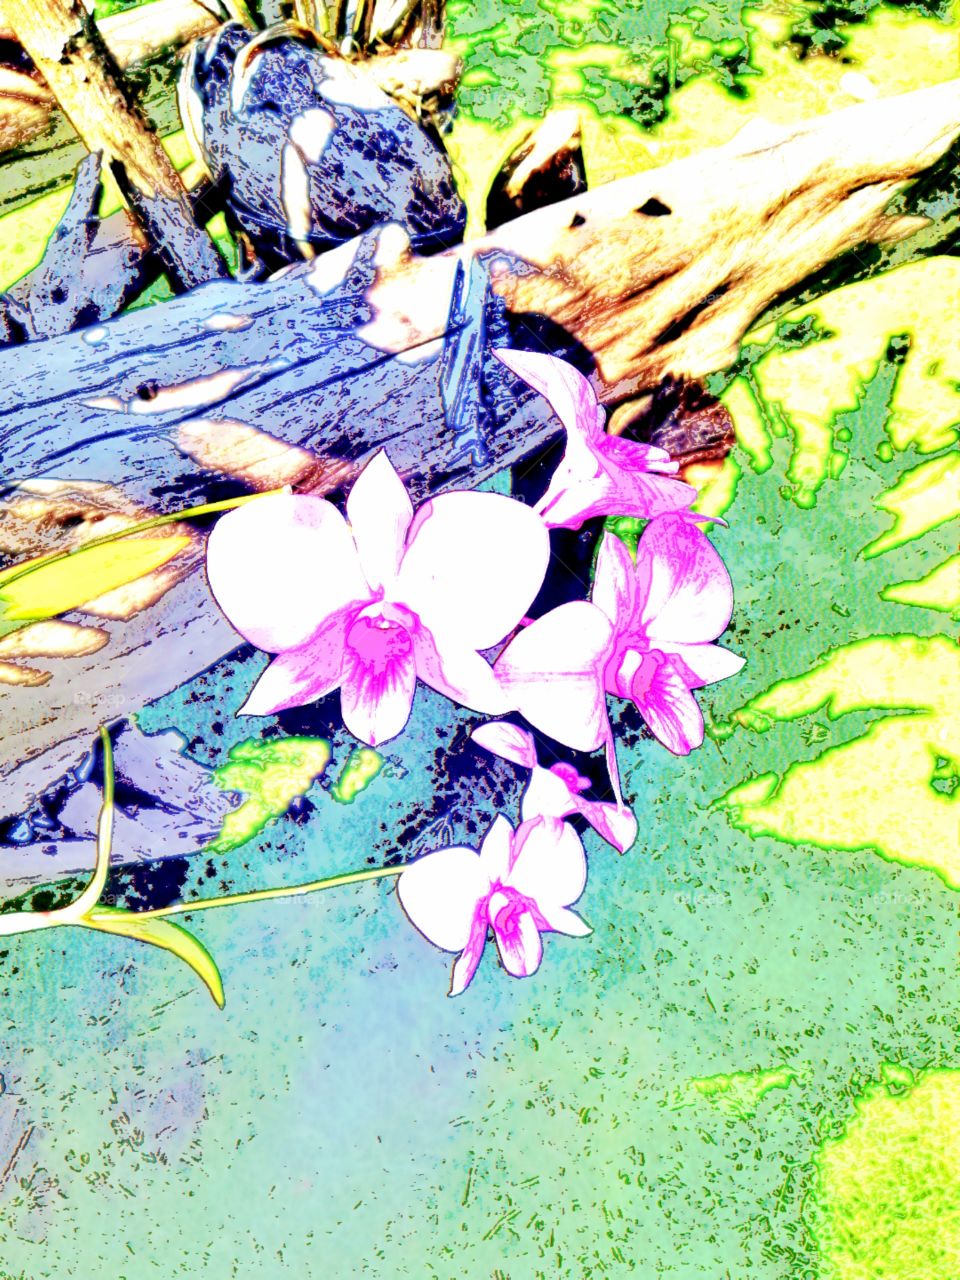 Crayon drawing of pink orchids growing on drift wood root in a tropical garden, Mindoro, Philippines